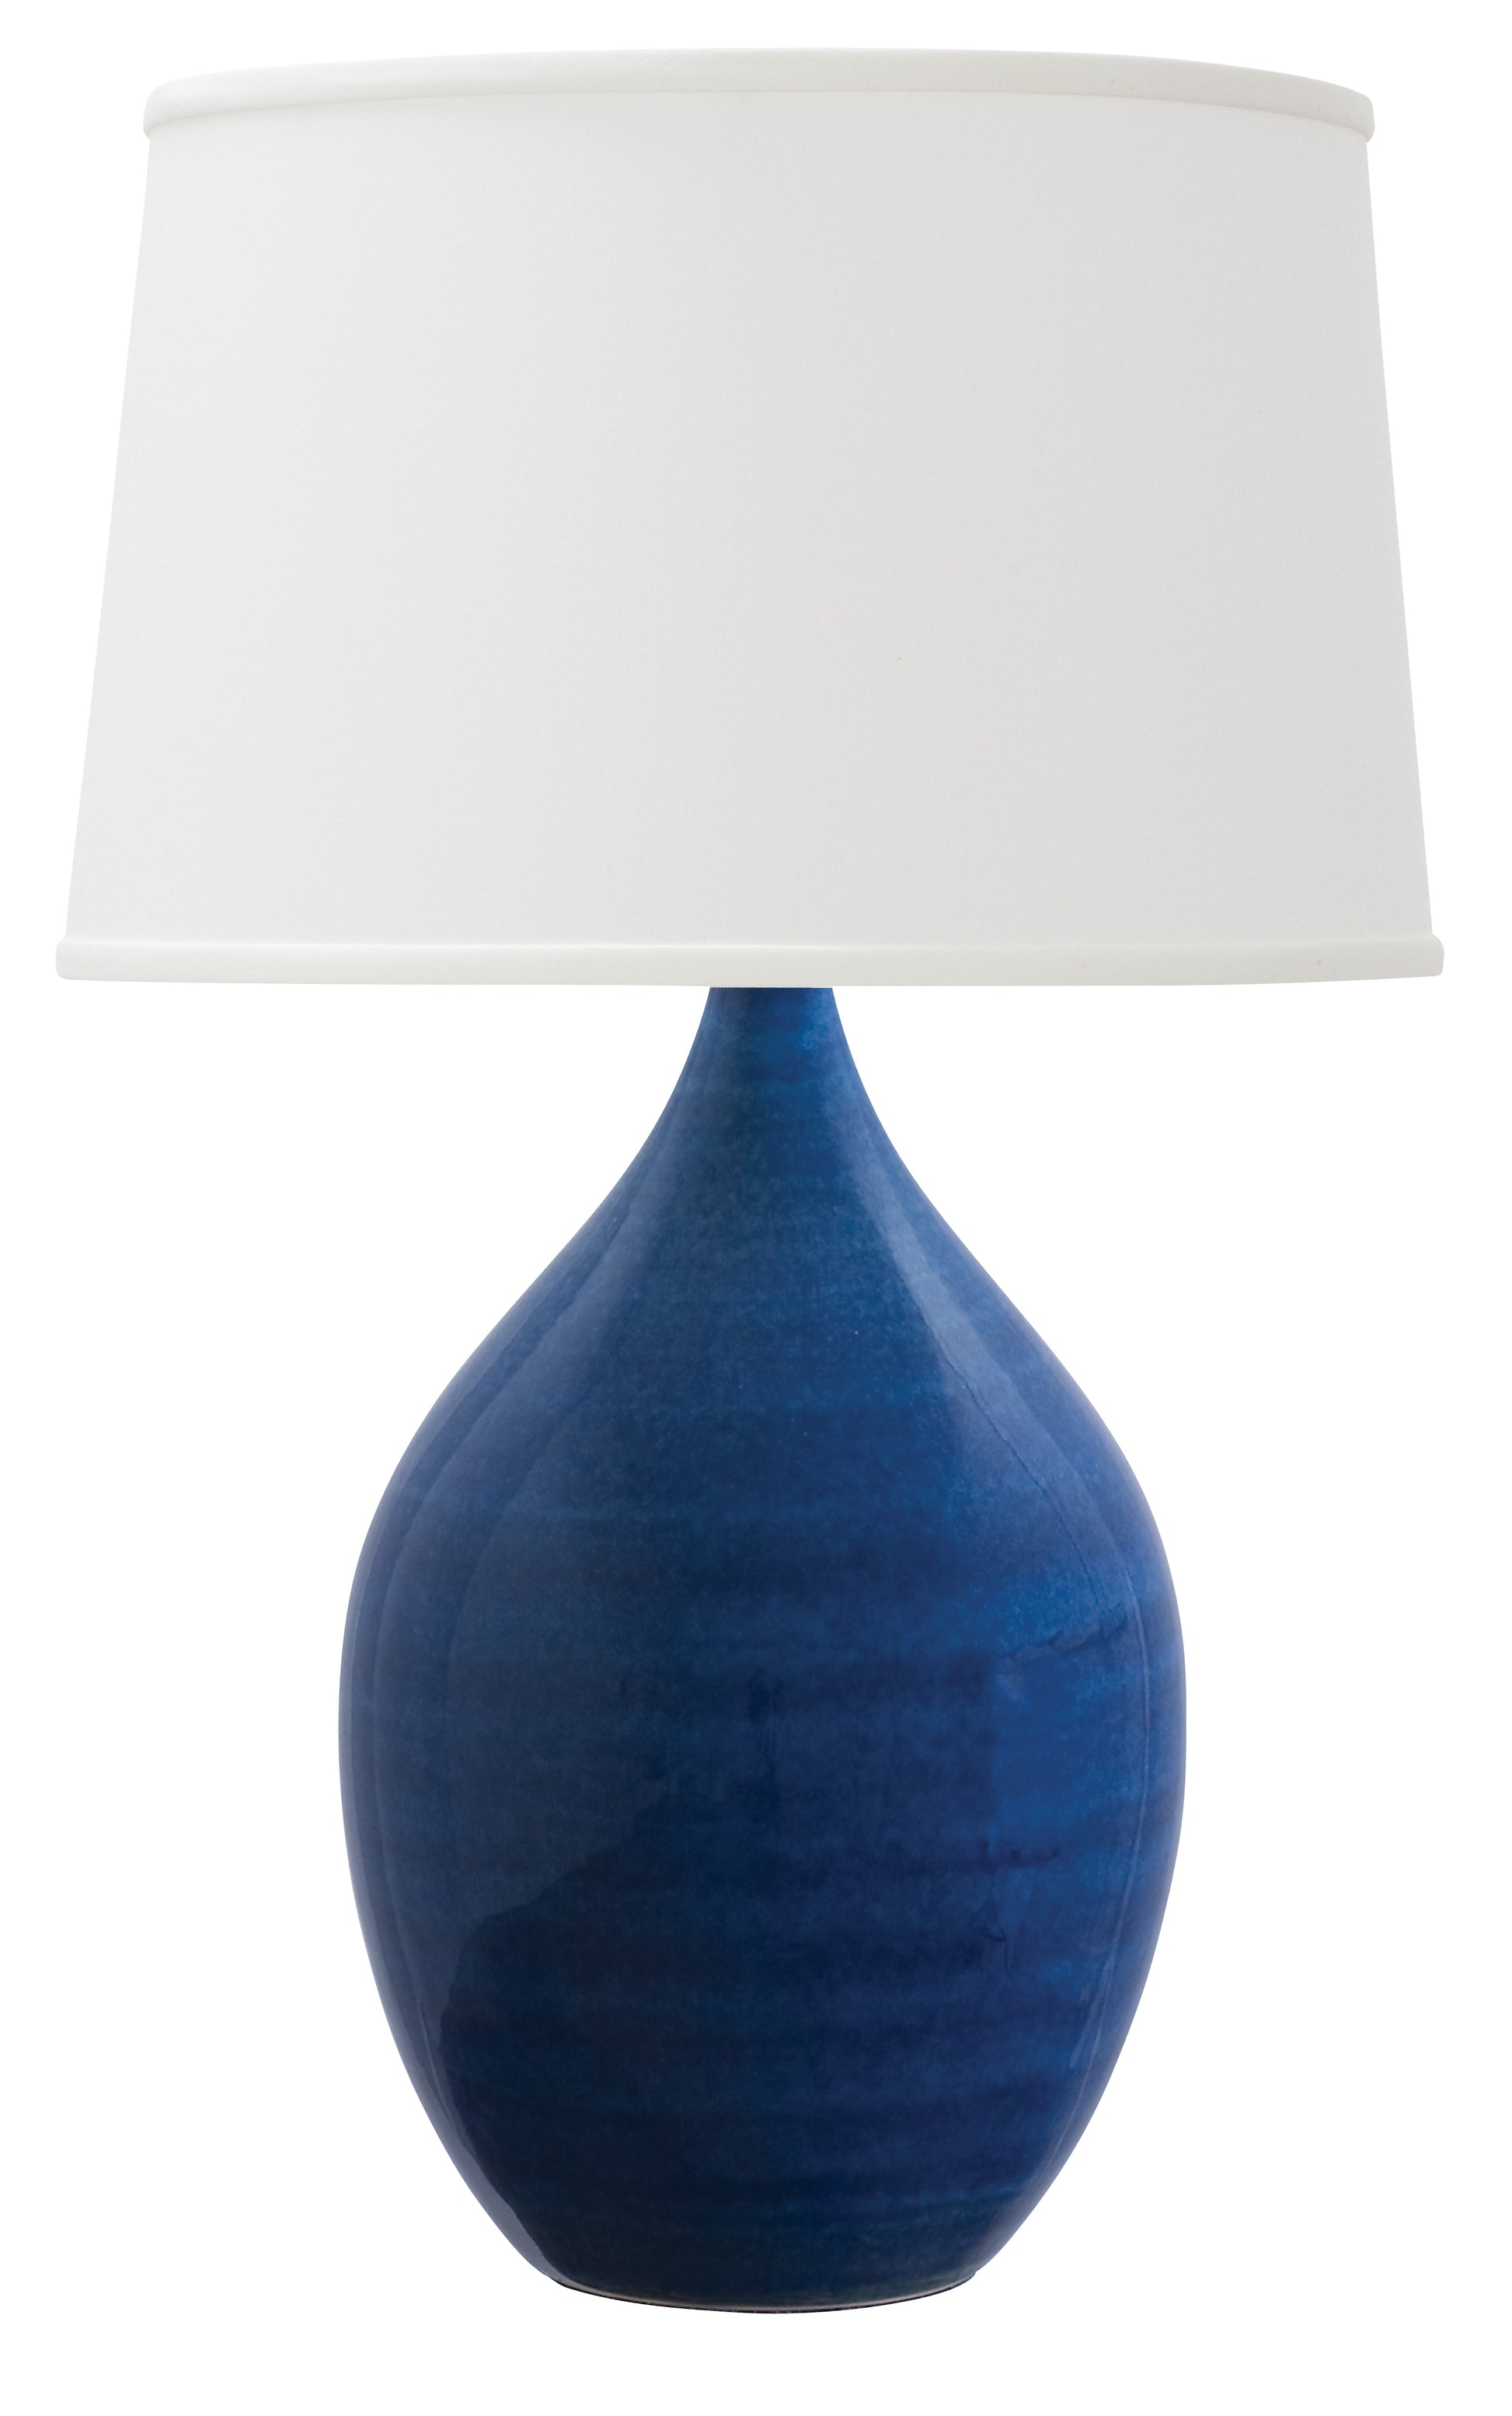 House of Troy Scatchard 24.5" Stoneware Table Lamp in Blue Gloss GS402-BG